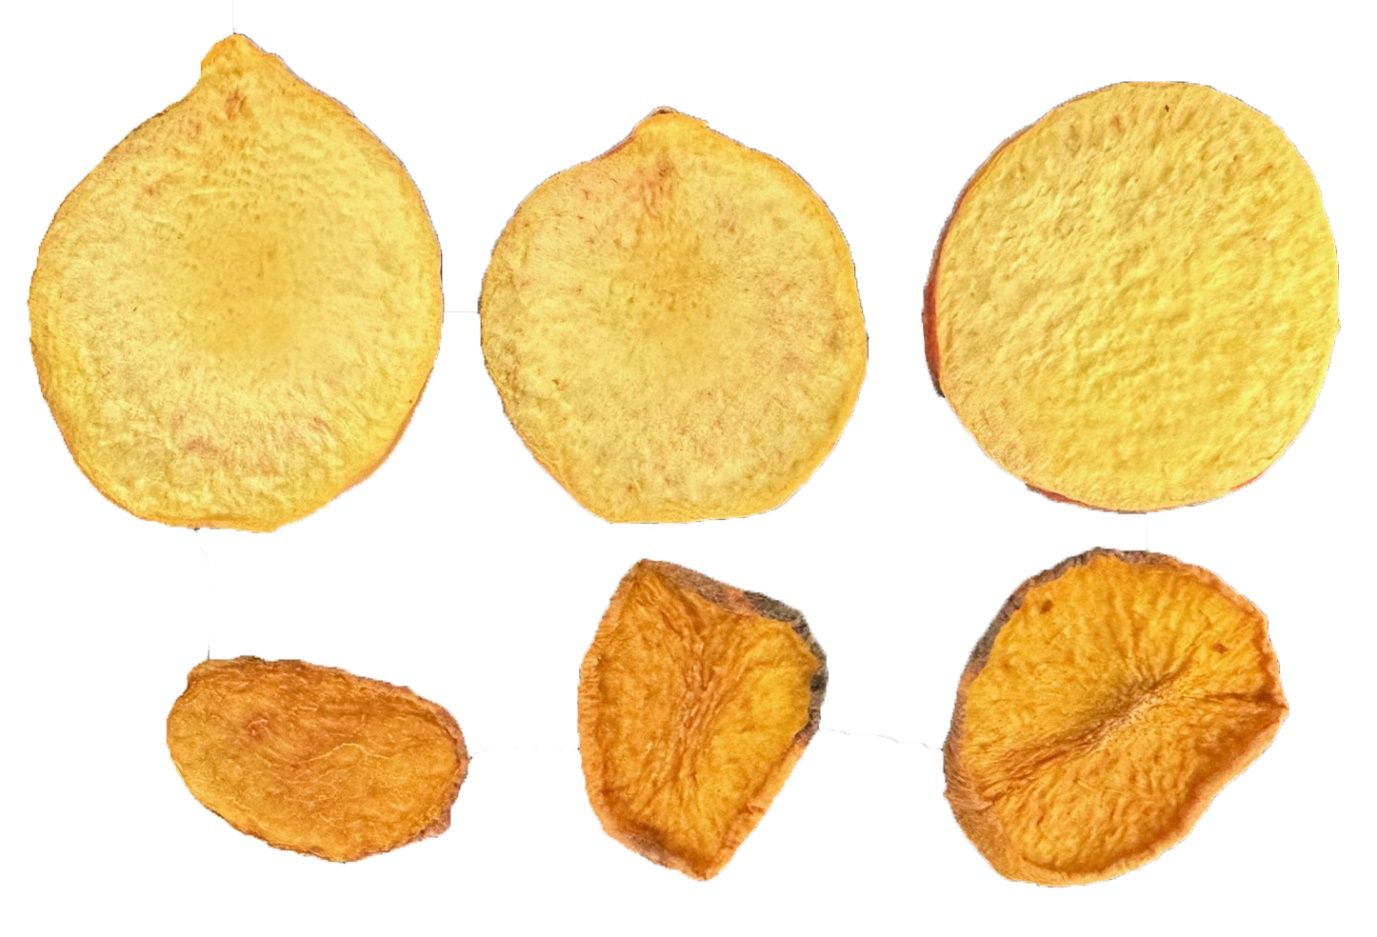 Differences in shape and shrinkage between freeze-dried (top) and dehydrated (bottom) ‘UFOne’ peach slices.